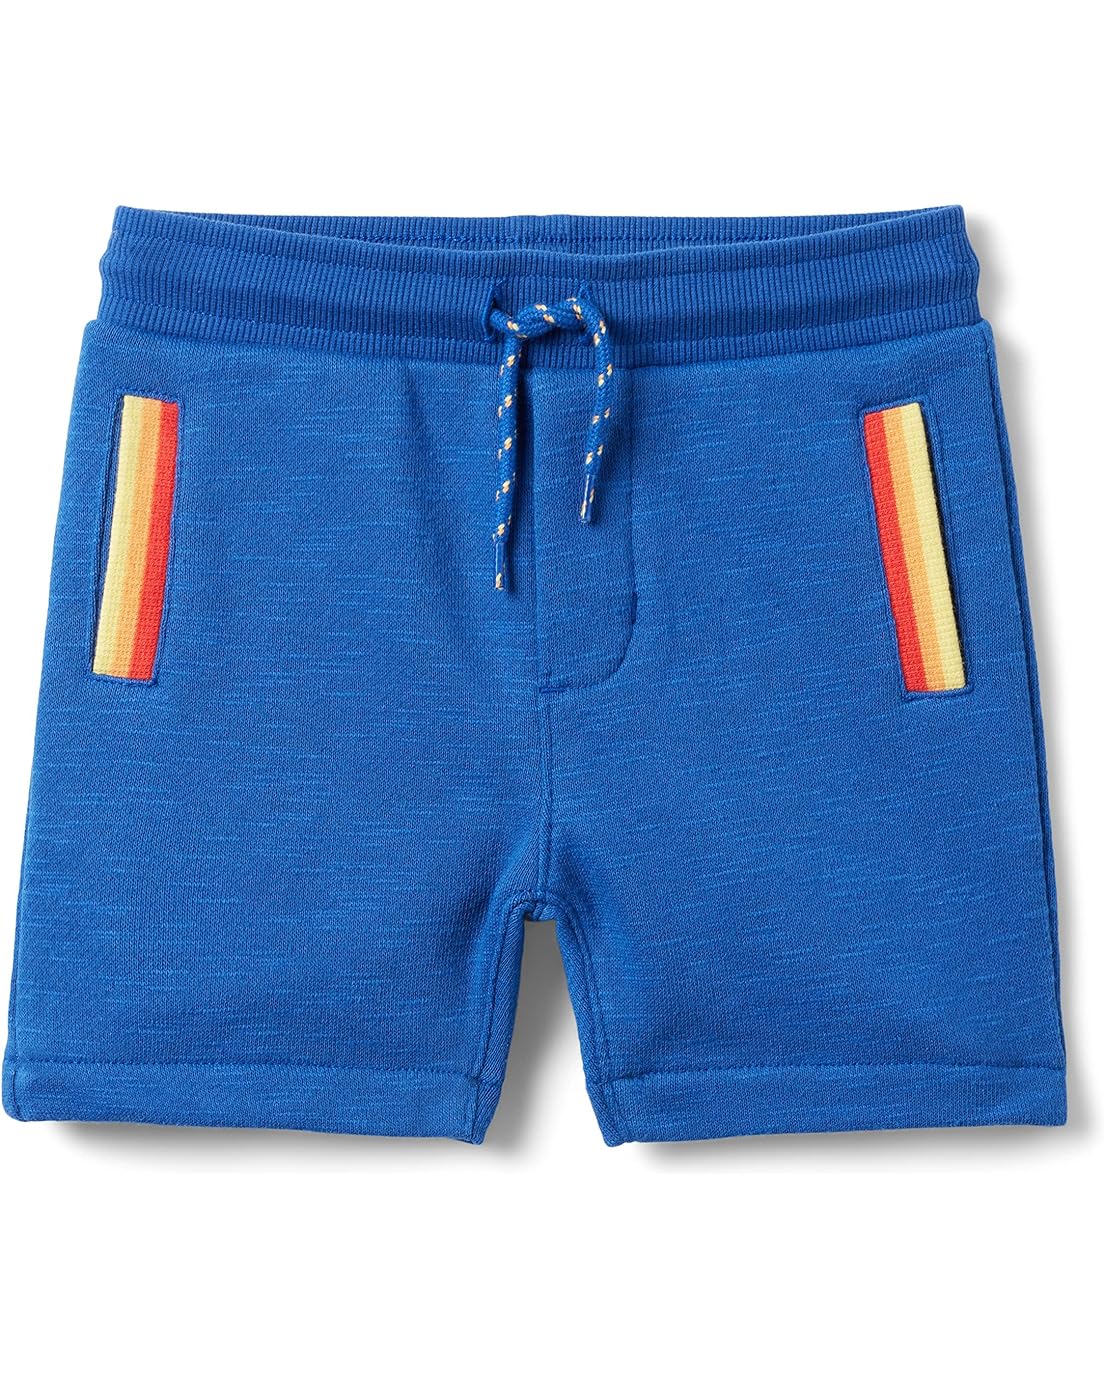 Janie and Jack Terry Shorts (Toddler/Little Kids/Big Kids)